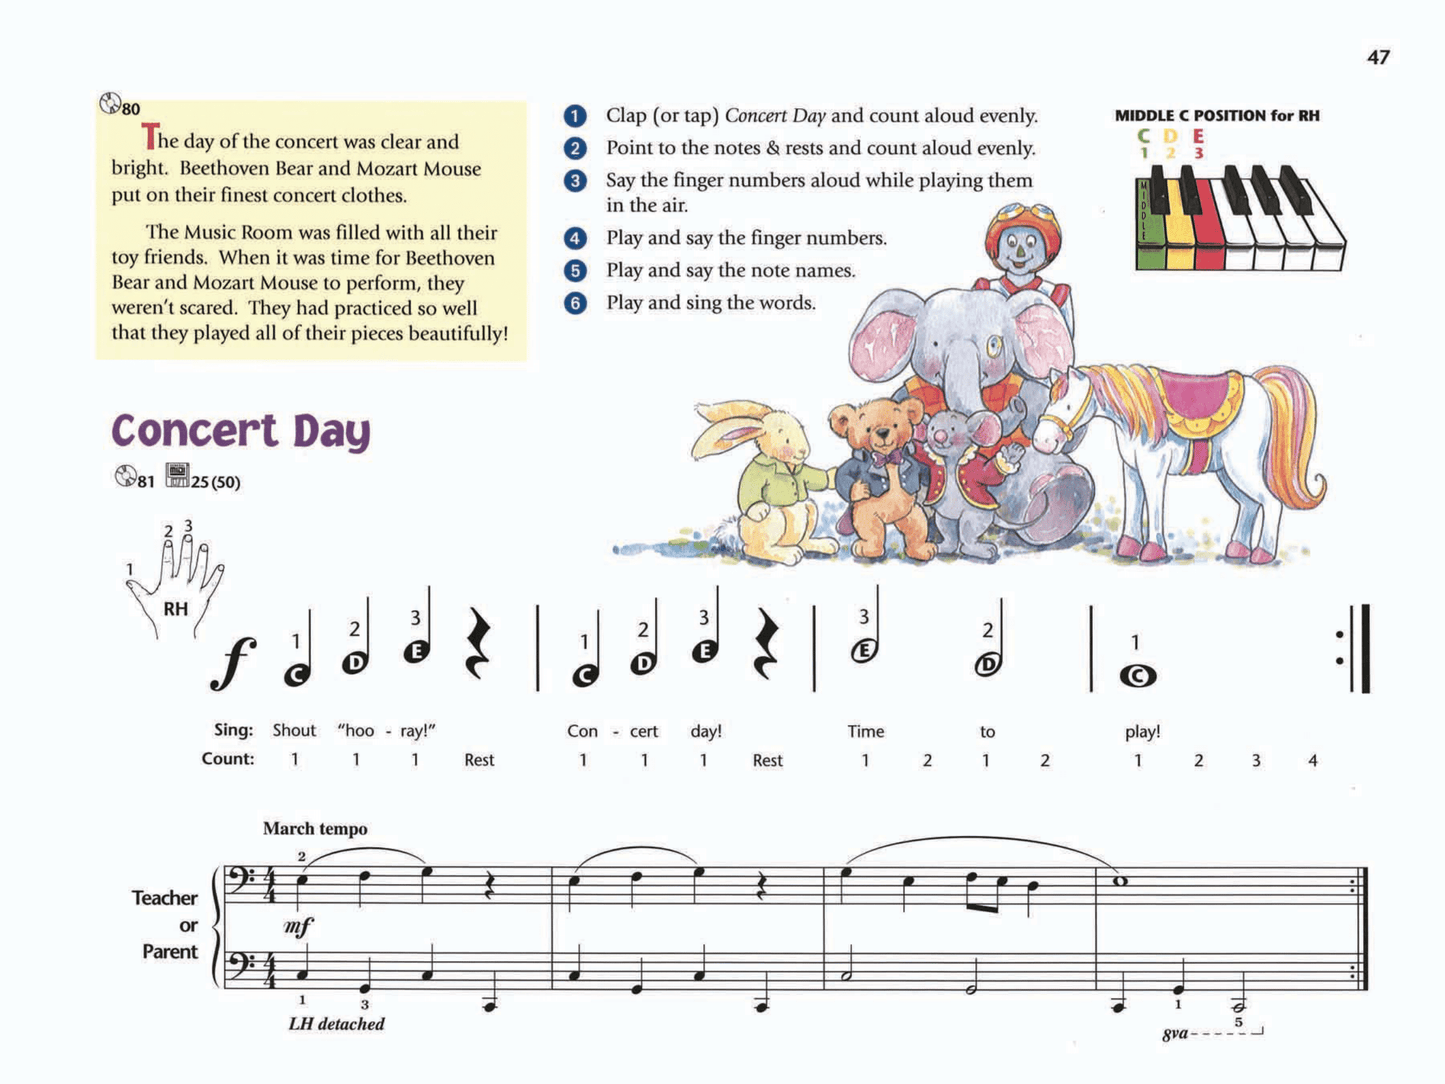 Alfred's Music For Little Mozarts - Lesson Book 1